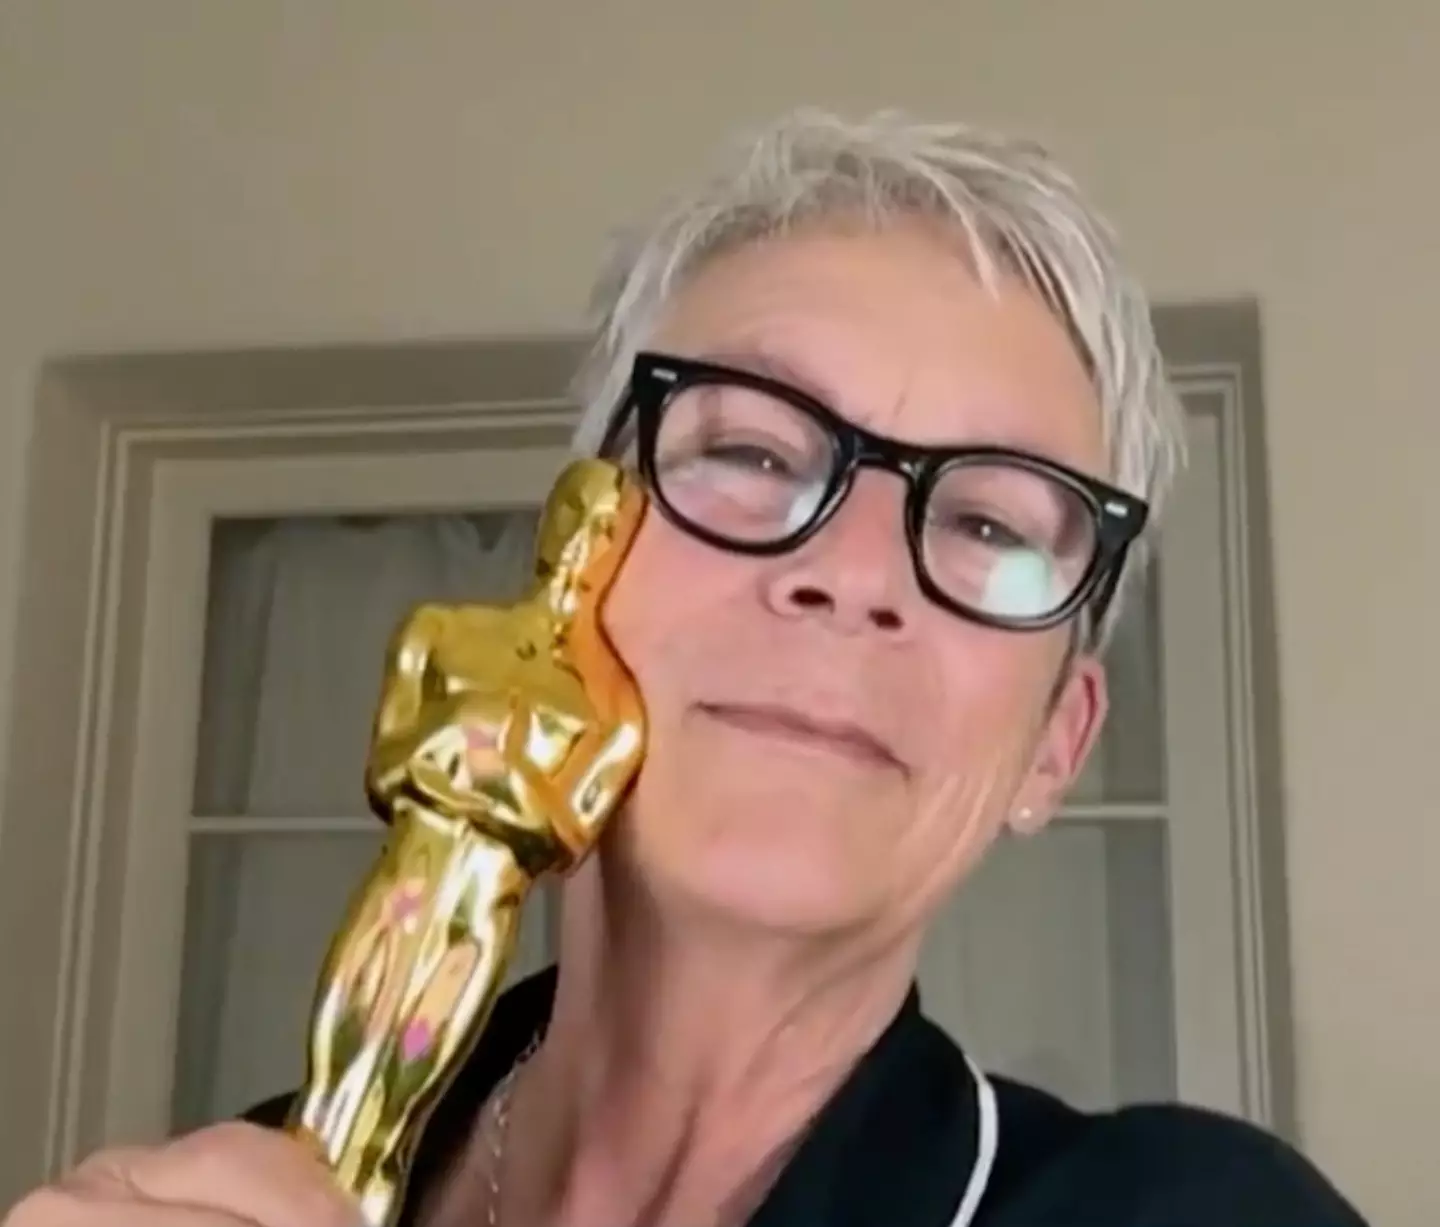 Jamie Lee Curtis has given her Oscars statue 'they/them' pronouns.